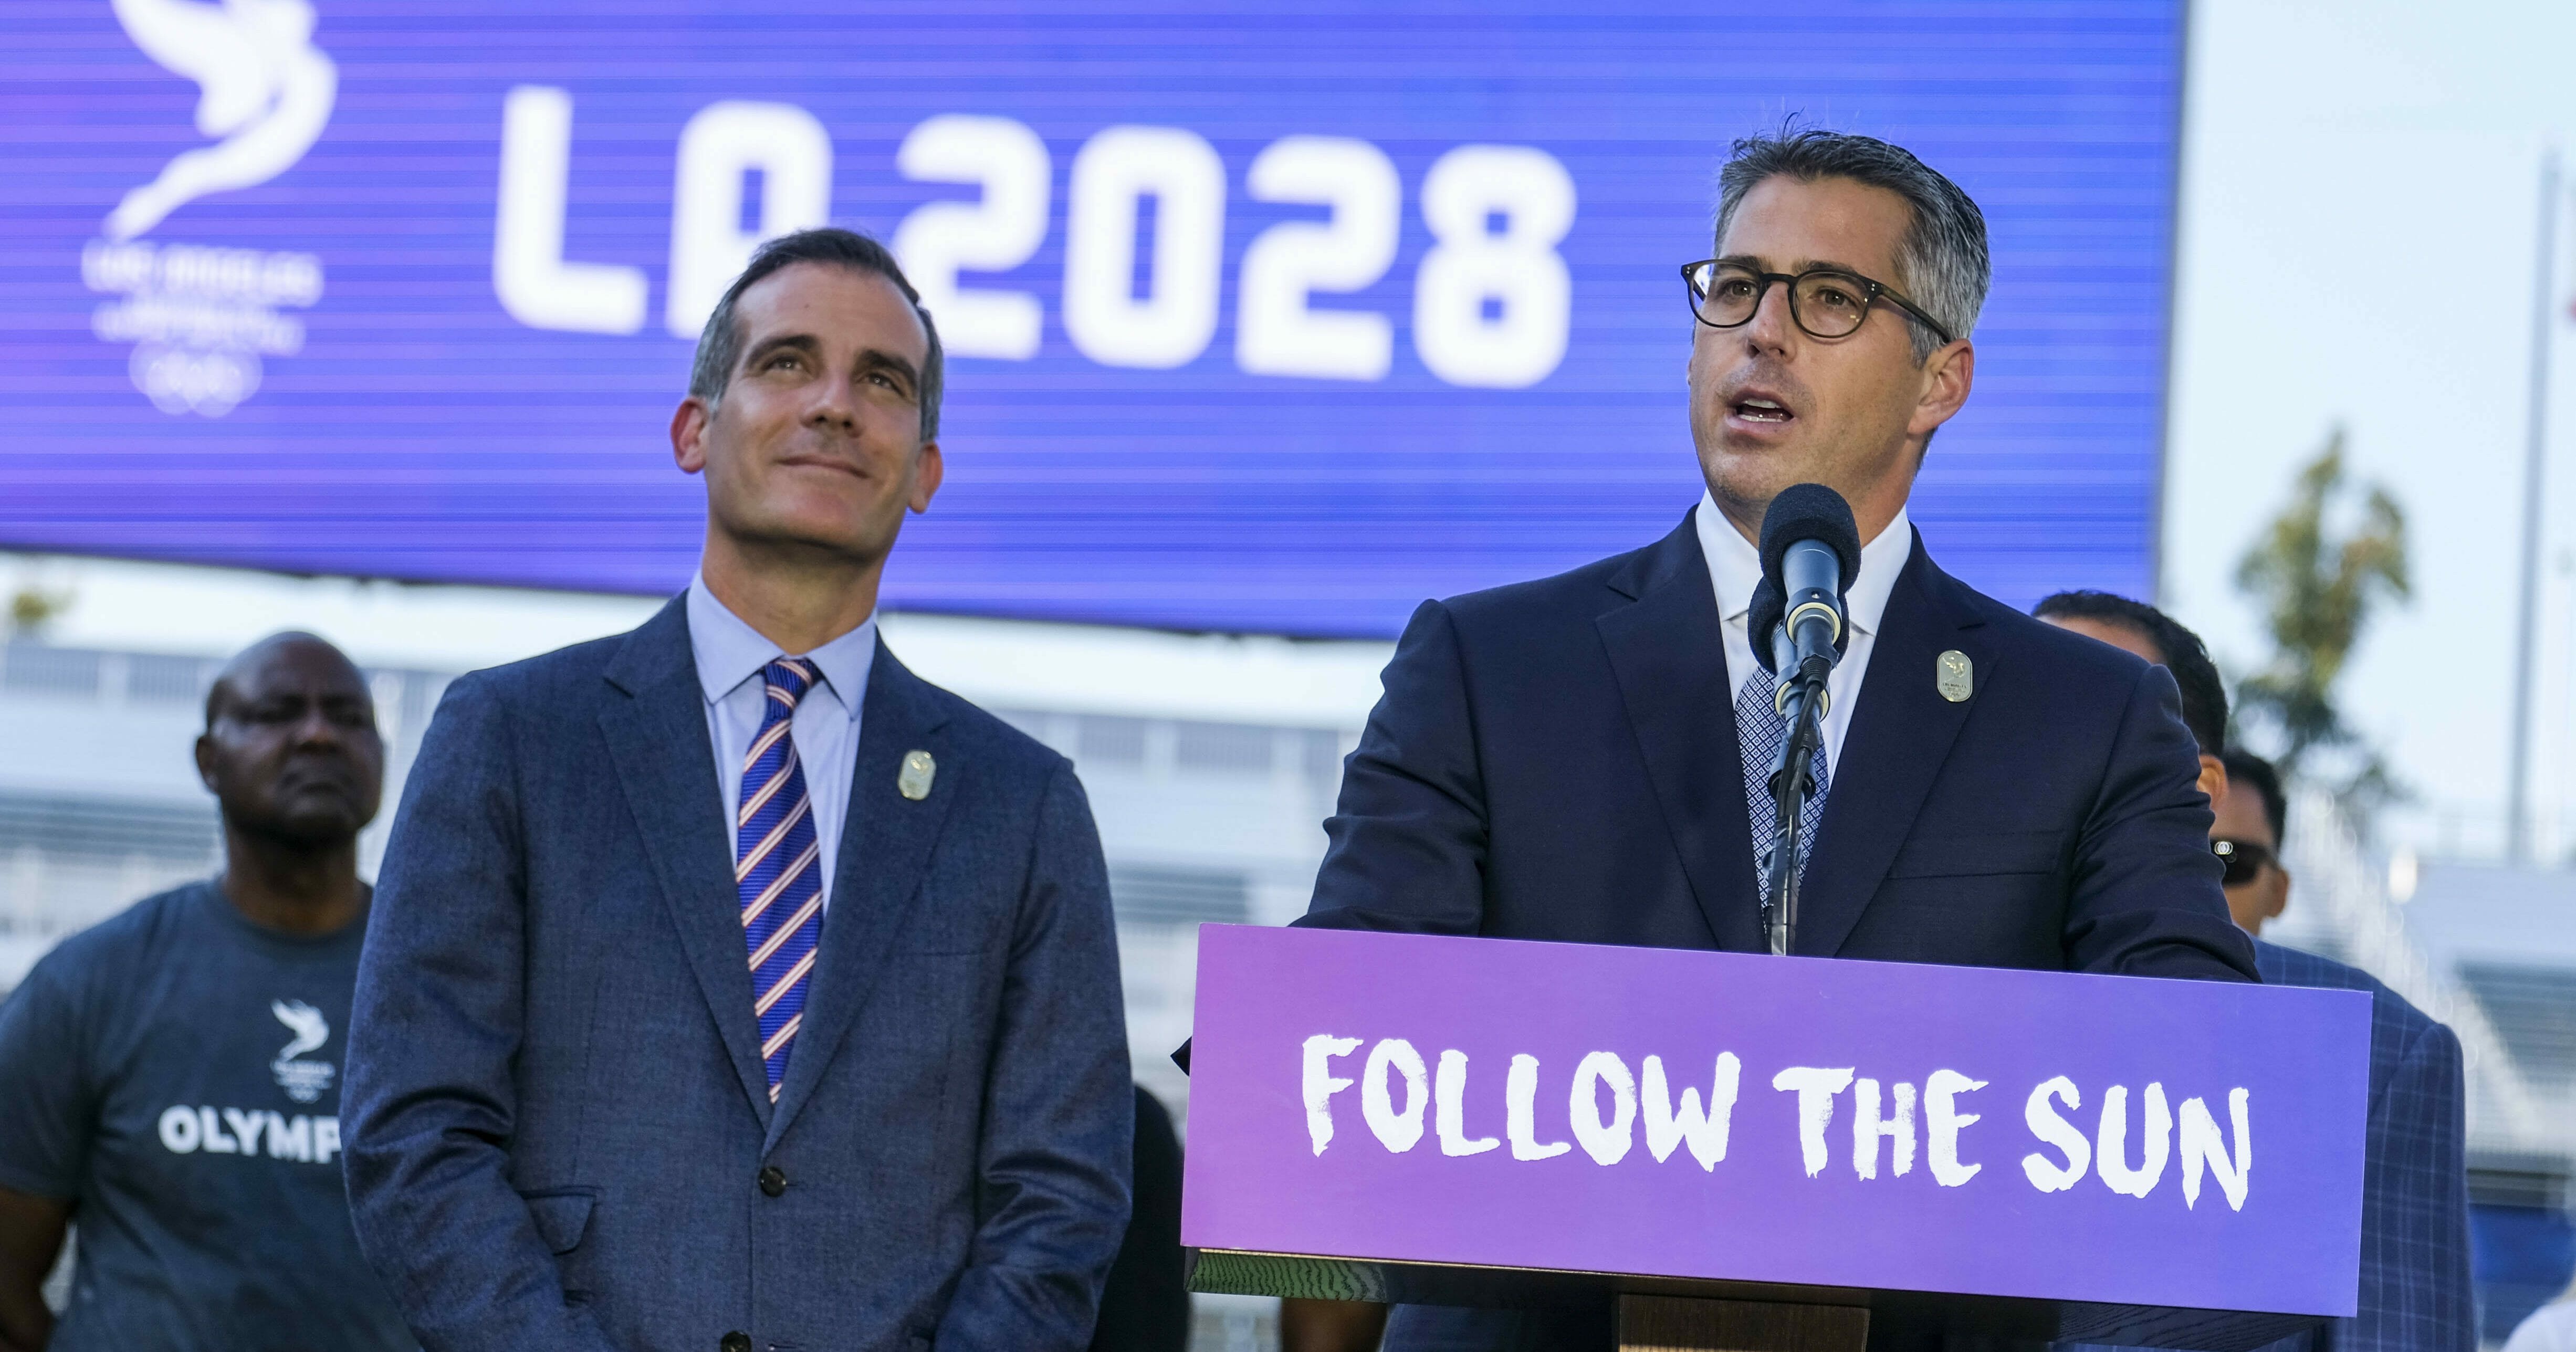 Los Angeles Mayor Eric Garcetti, left, listens as Los Angeles Olympic Committee leader Casey Wasserman speaks during a July 31, 2017, news conference to announce the city is hosting the 2028 Summer Games.